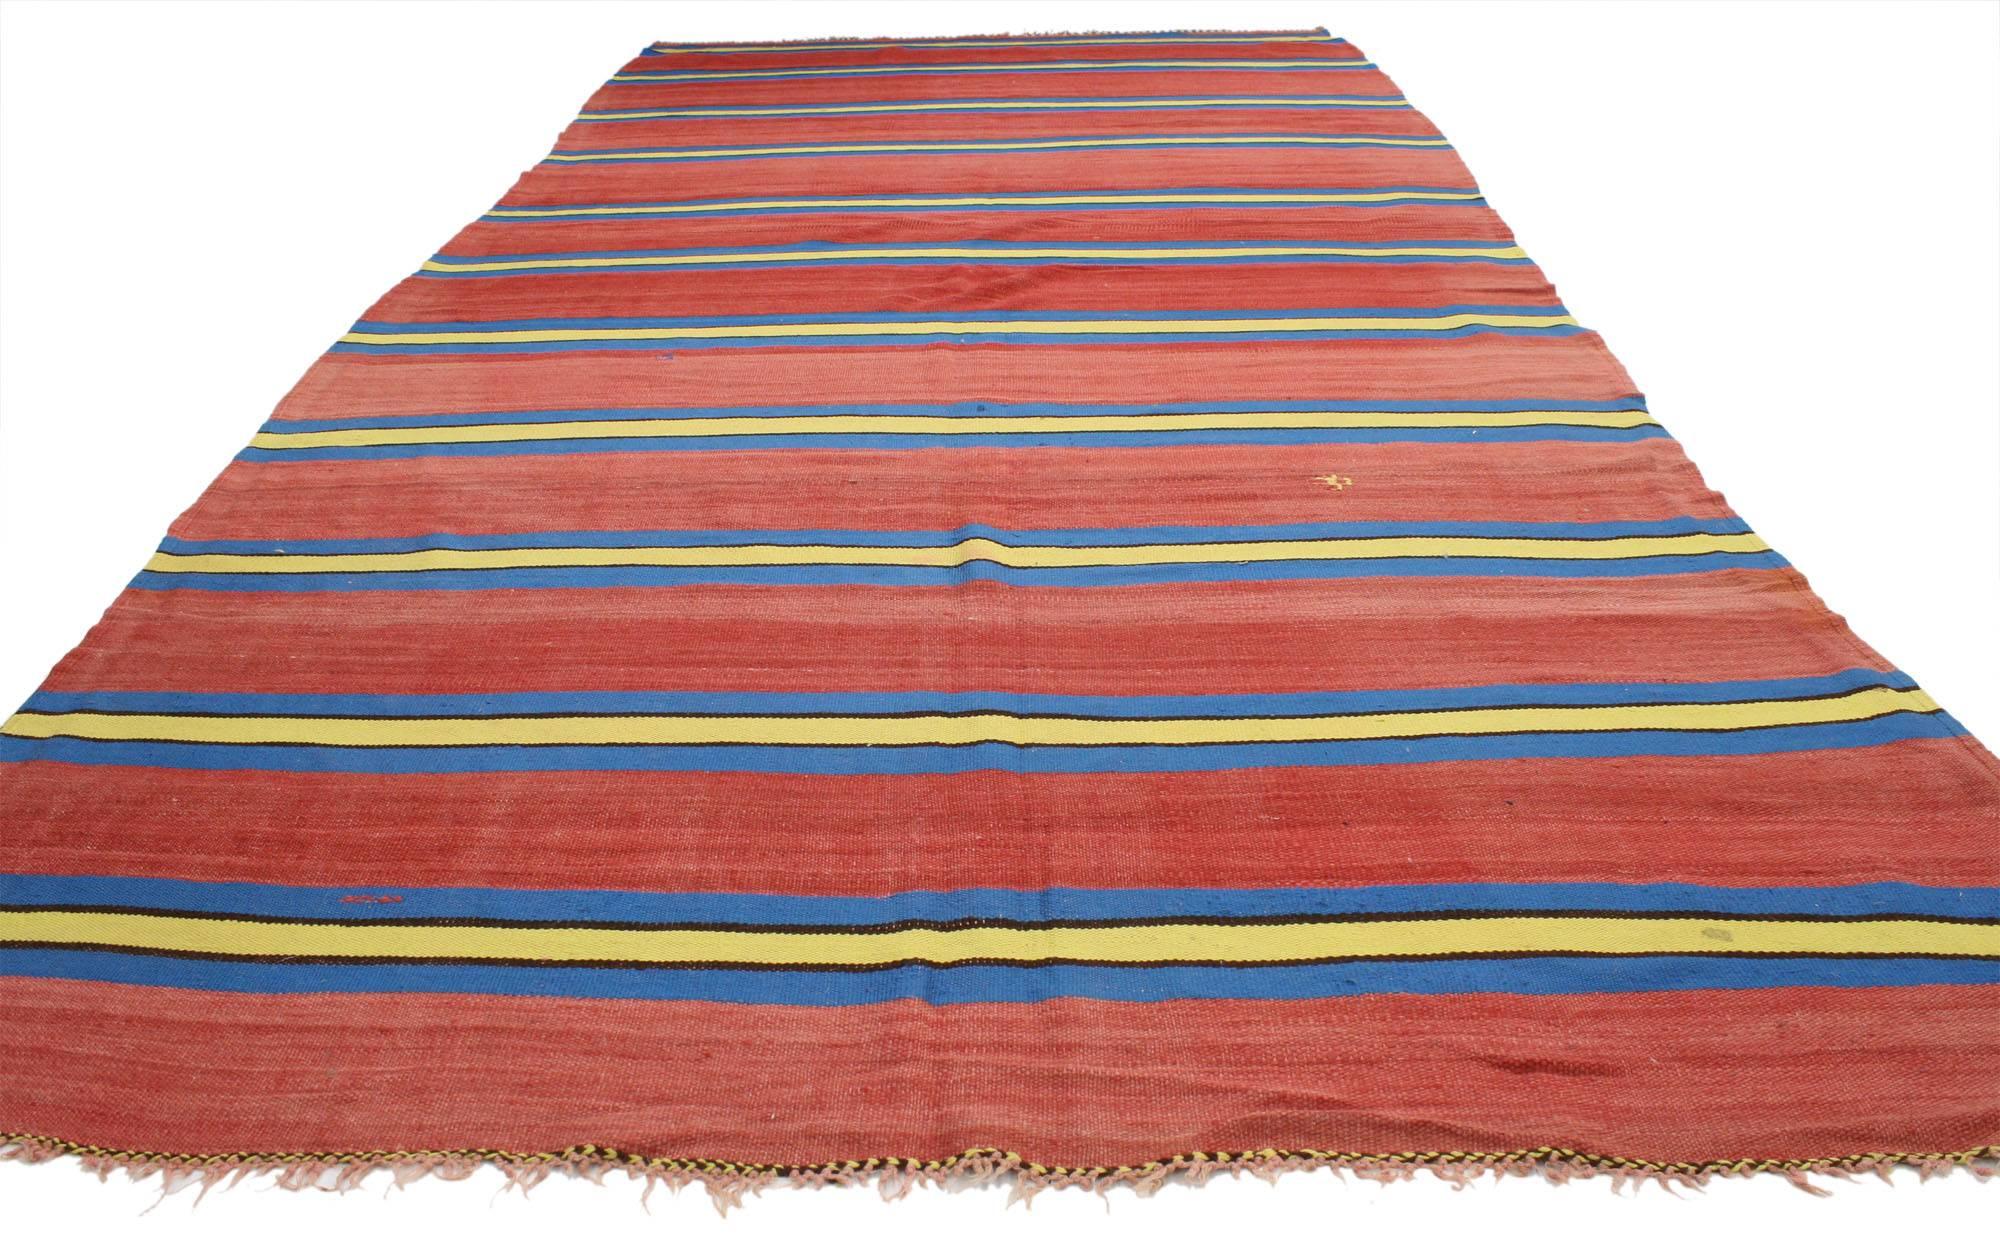 Hand-Woven Vintage Berber Moroccan Striped Kilim Rug with Modern Nautical Style